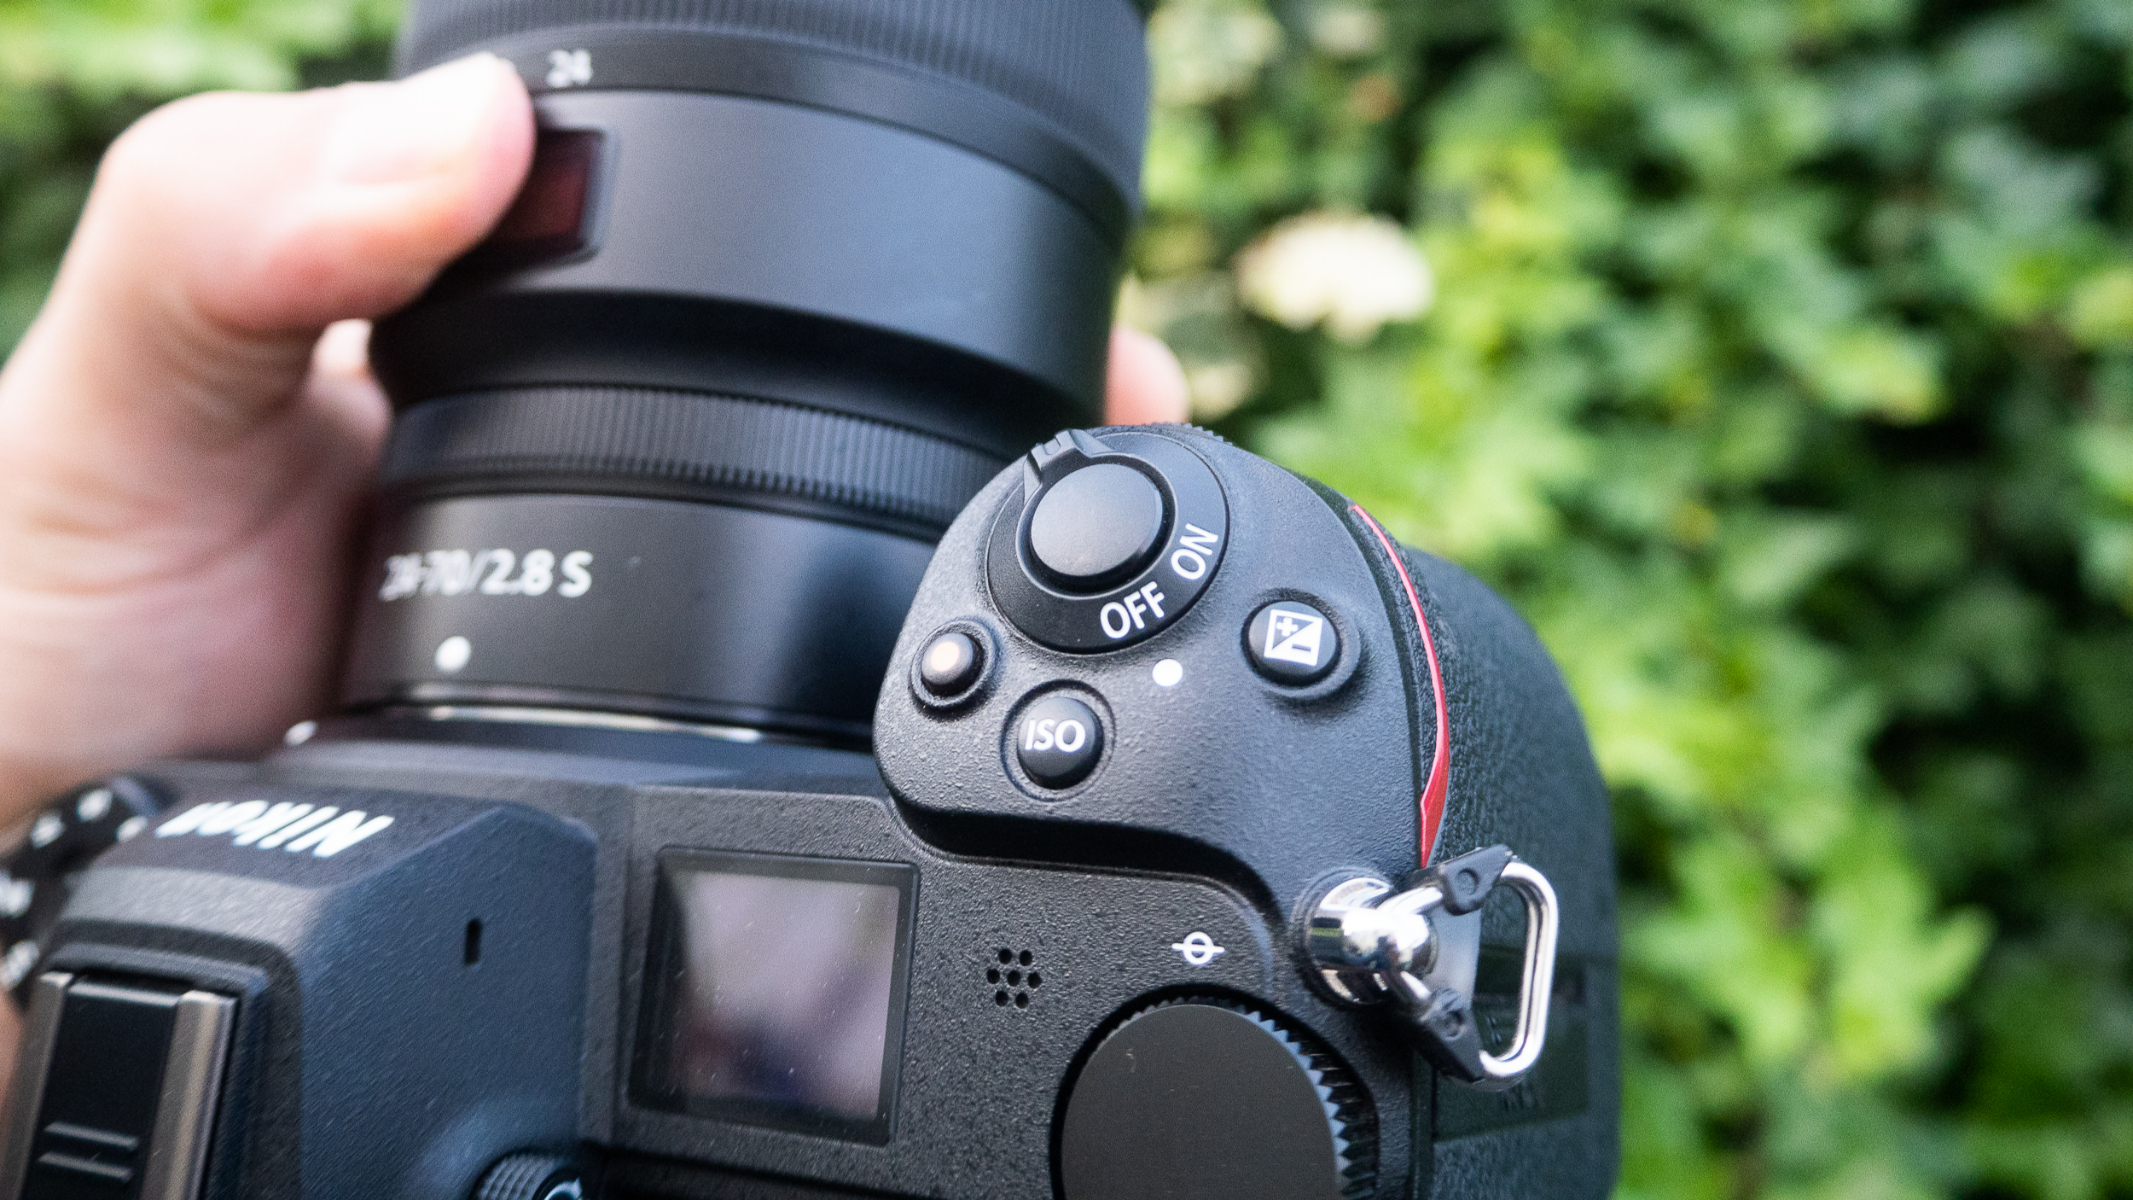 Photo shows the buttons on the top right of the Nikon Z6 ii